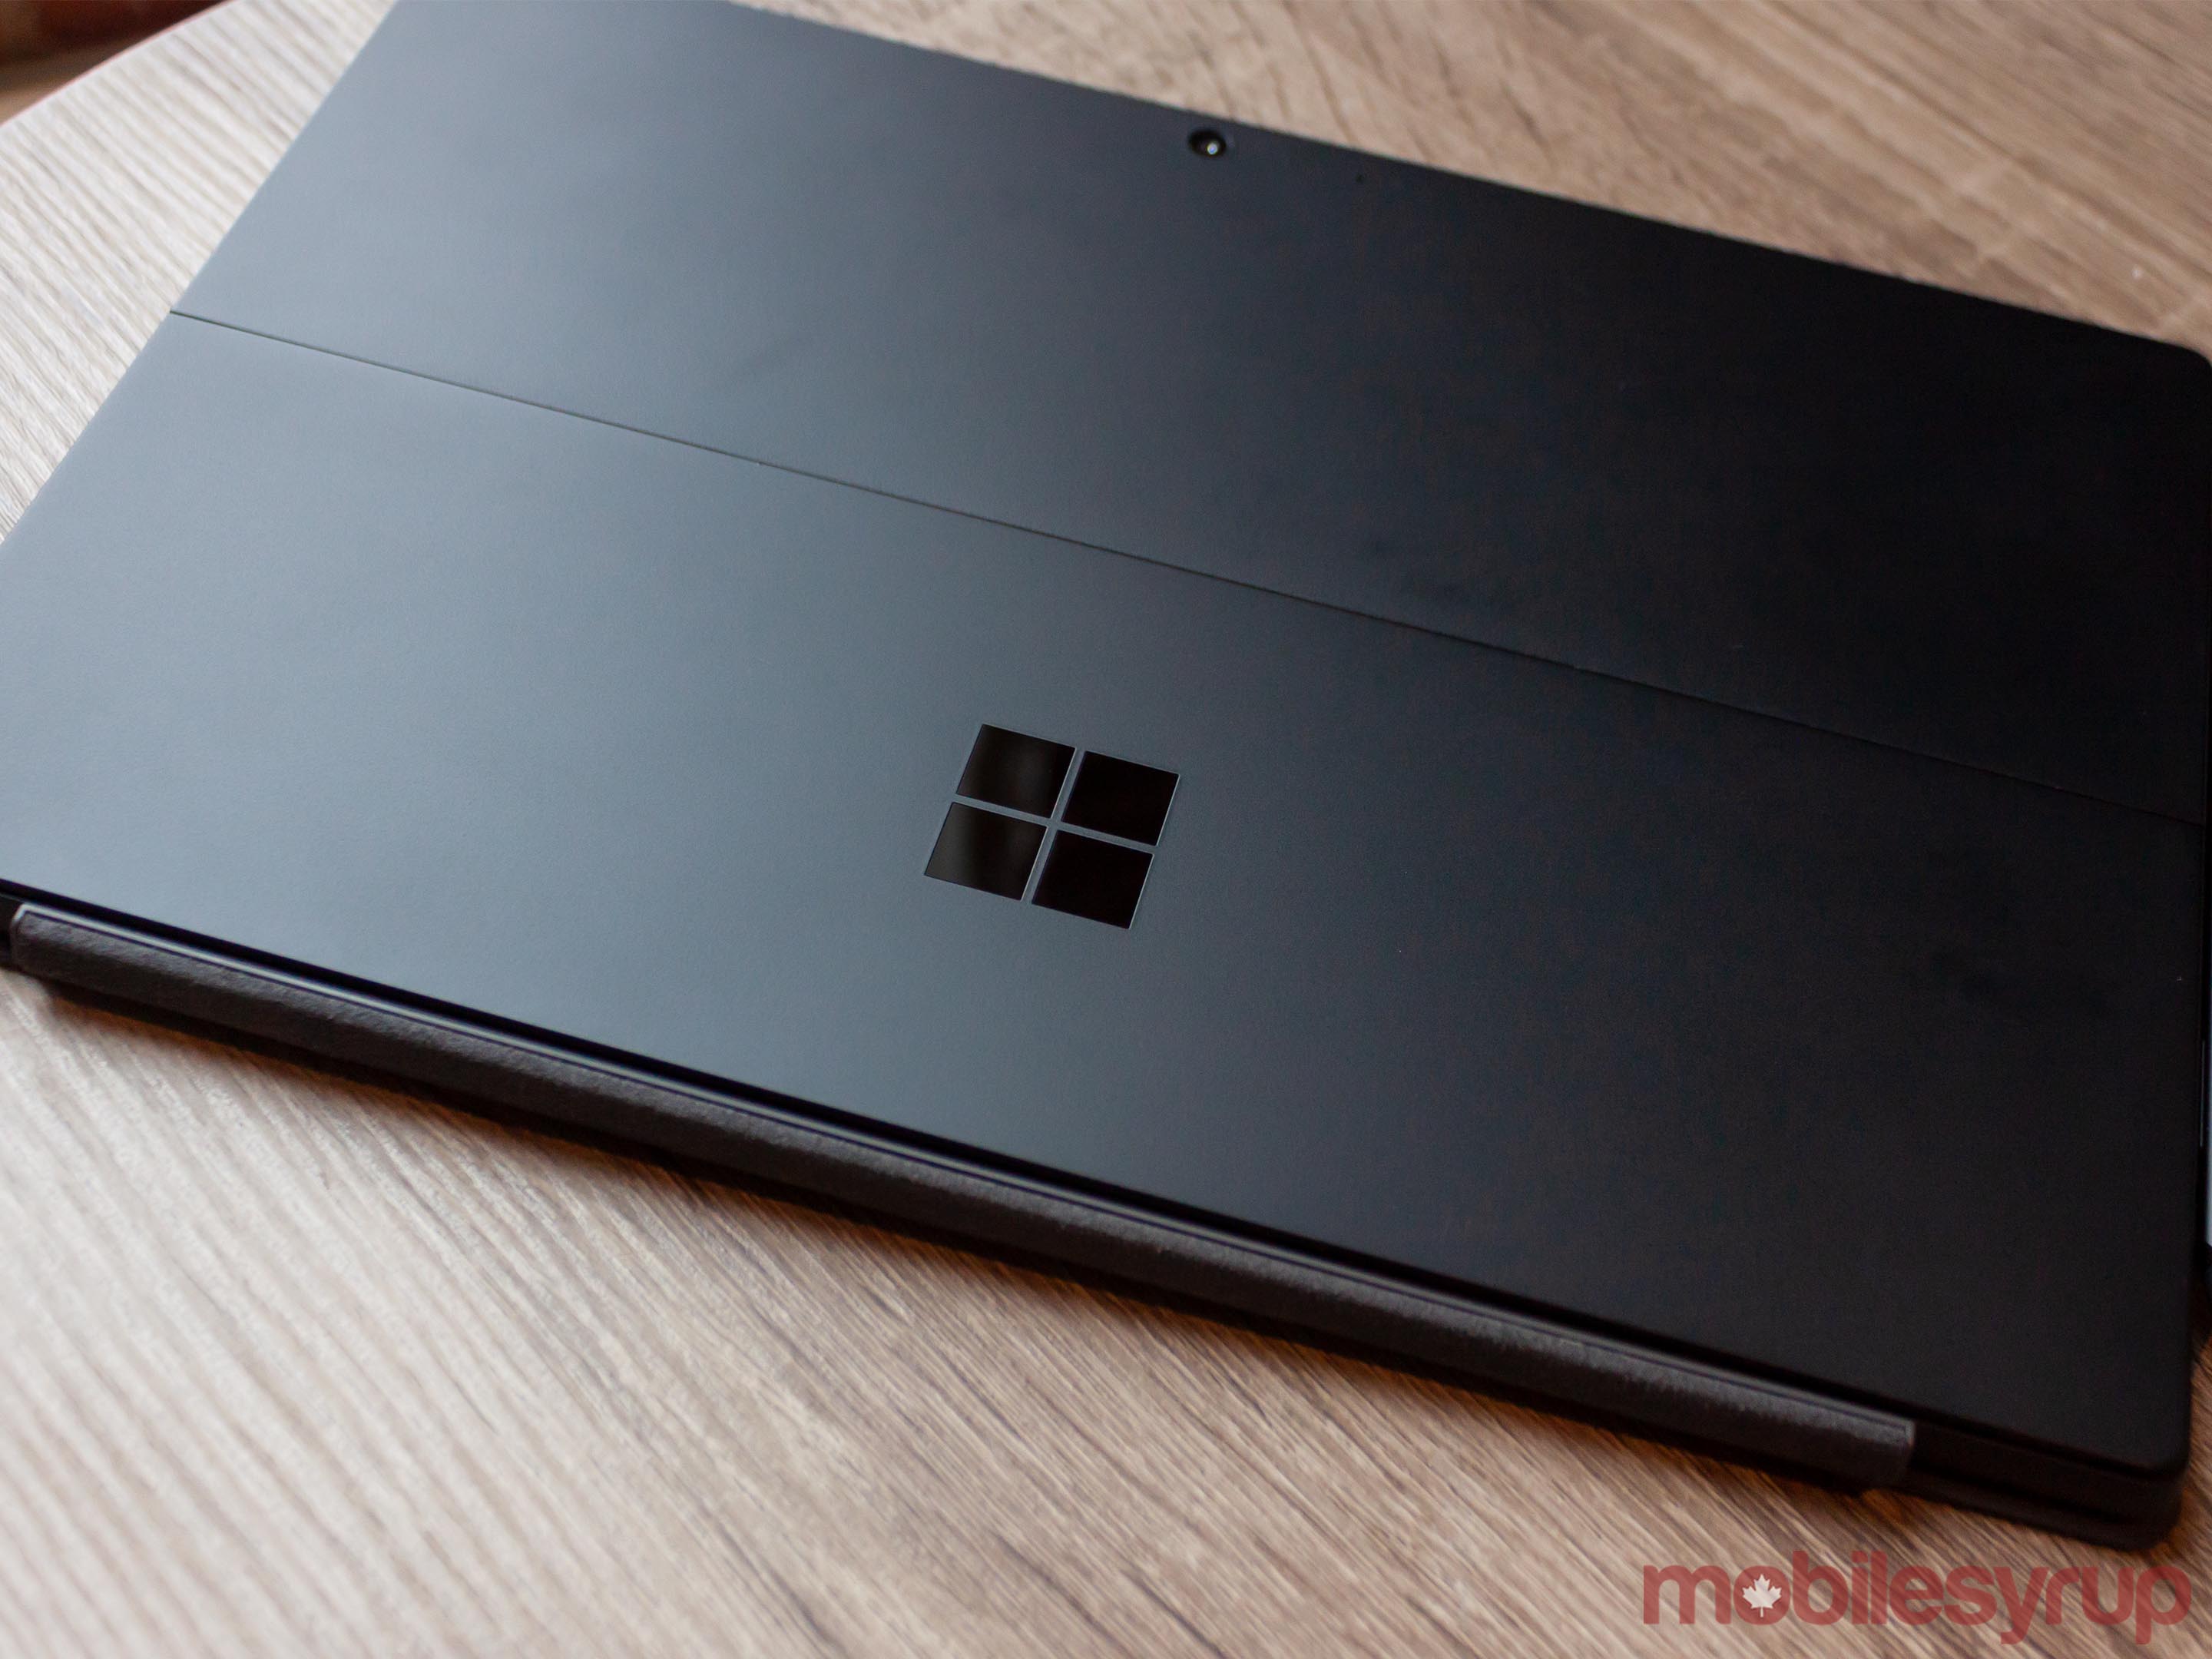 Surface Pro 6 in Black